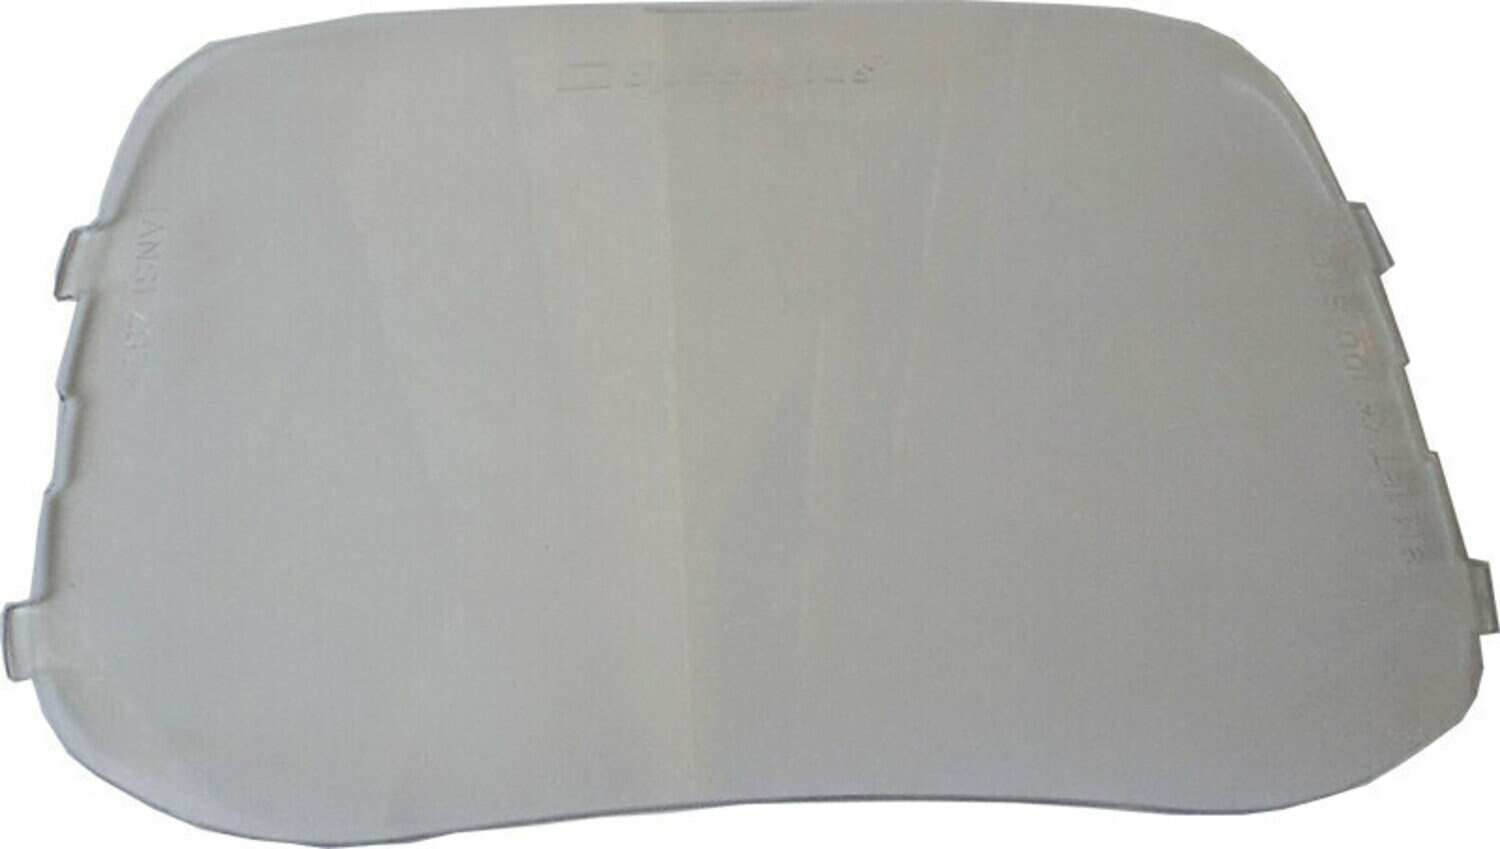 7000127444 - 3M Speedglas Outside Protection Plate 100 07-0200-52/37244(AAD),
Scratch Resistant, 10 EA/Case